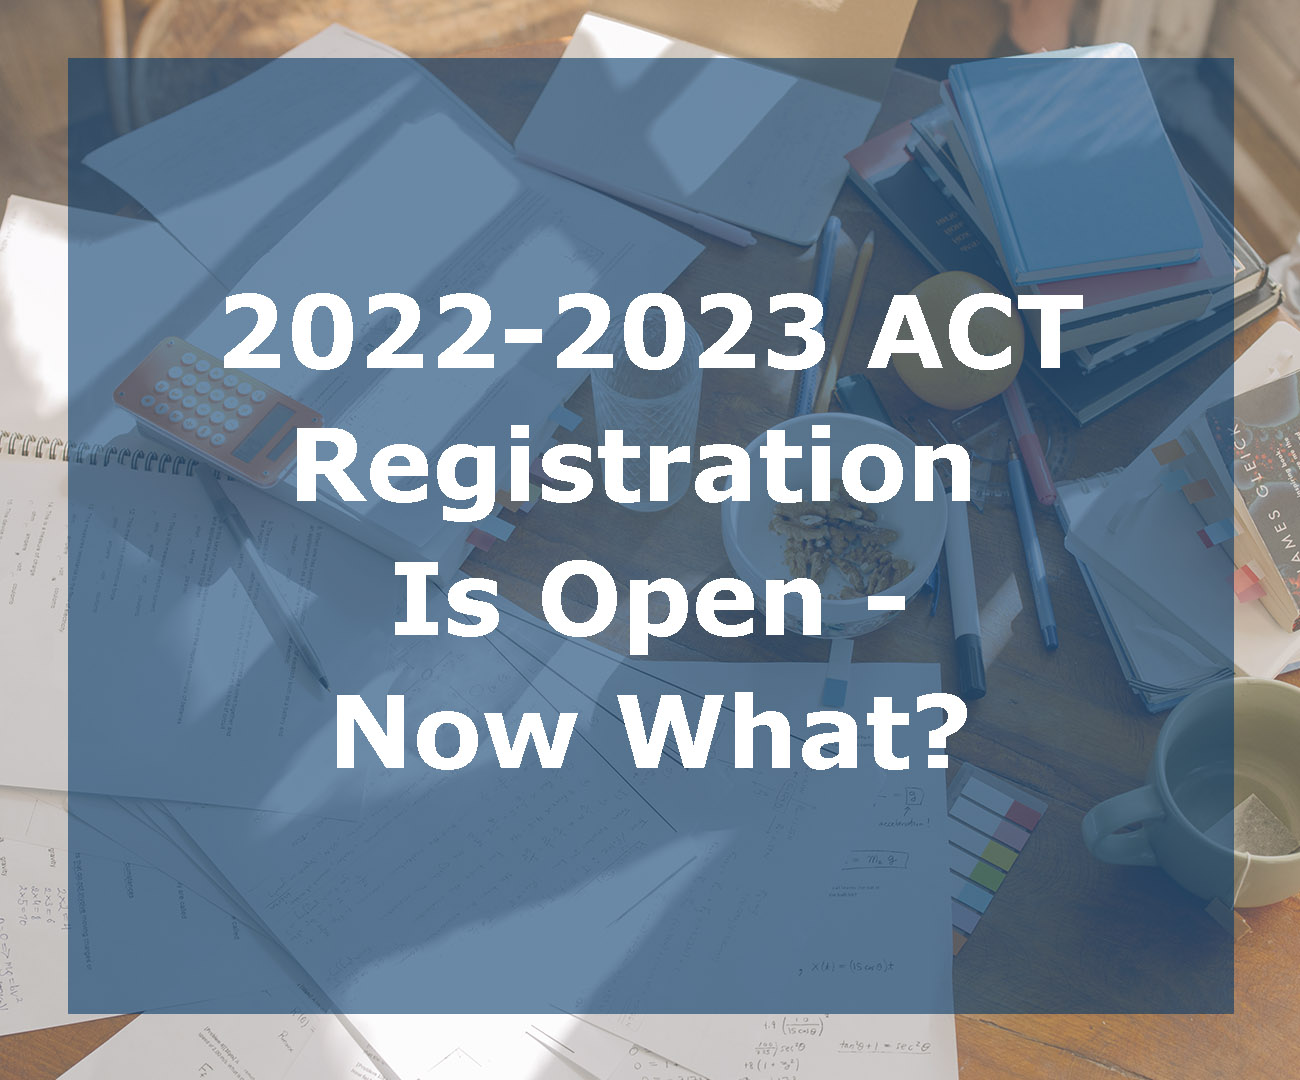 The 20222023 ACT Registration is now open! What now? Insight Education